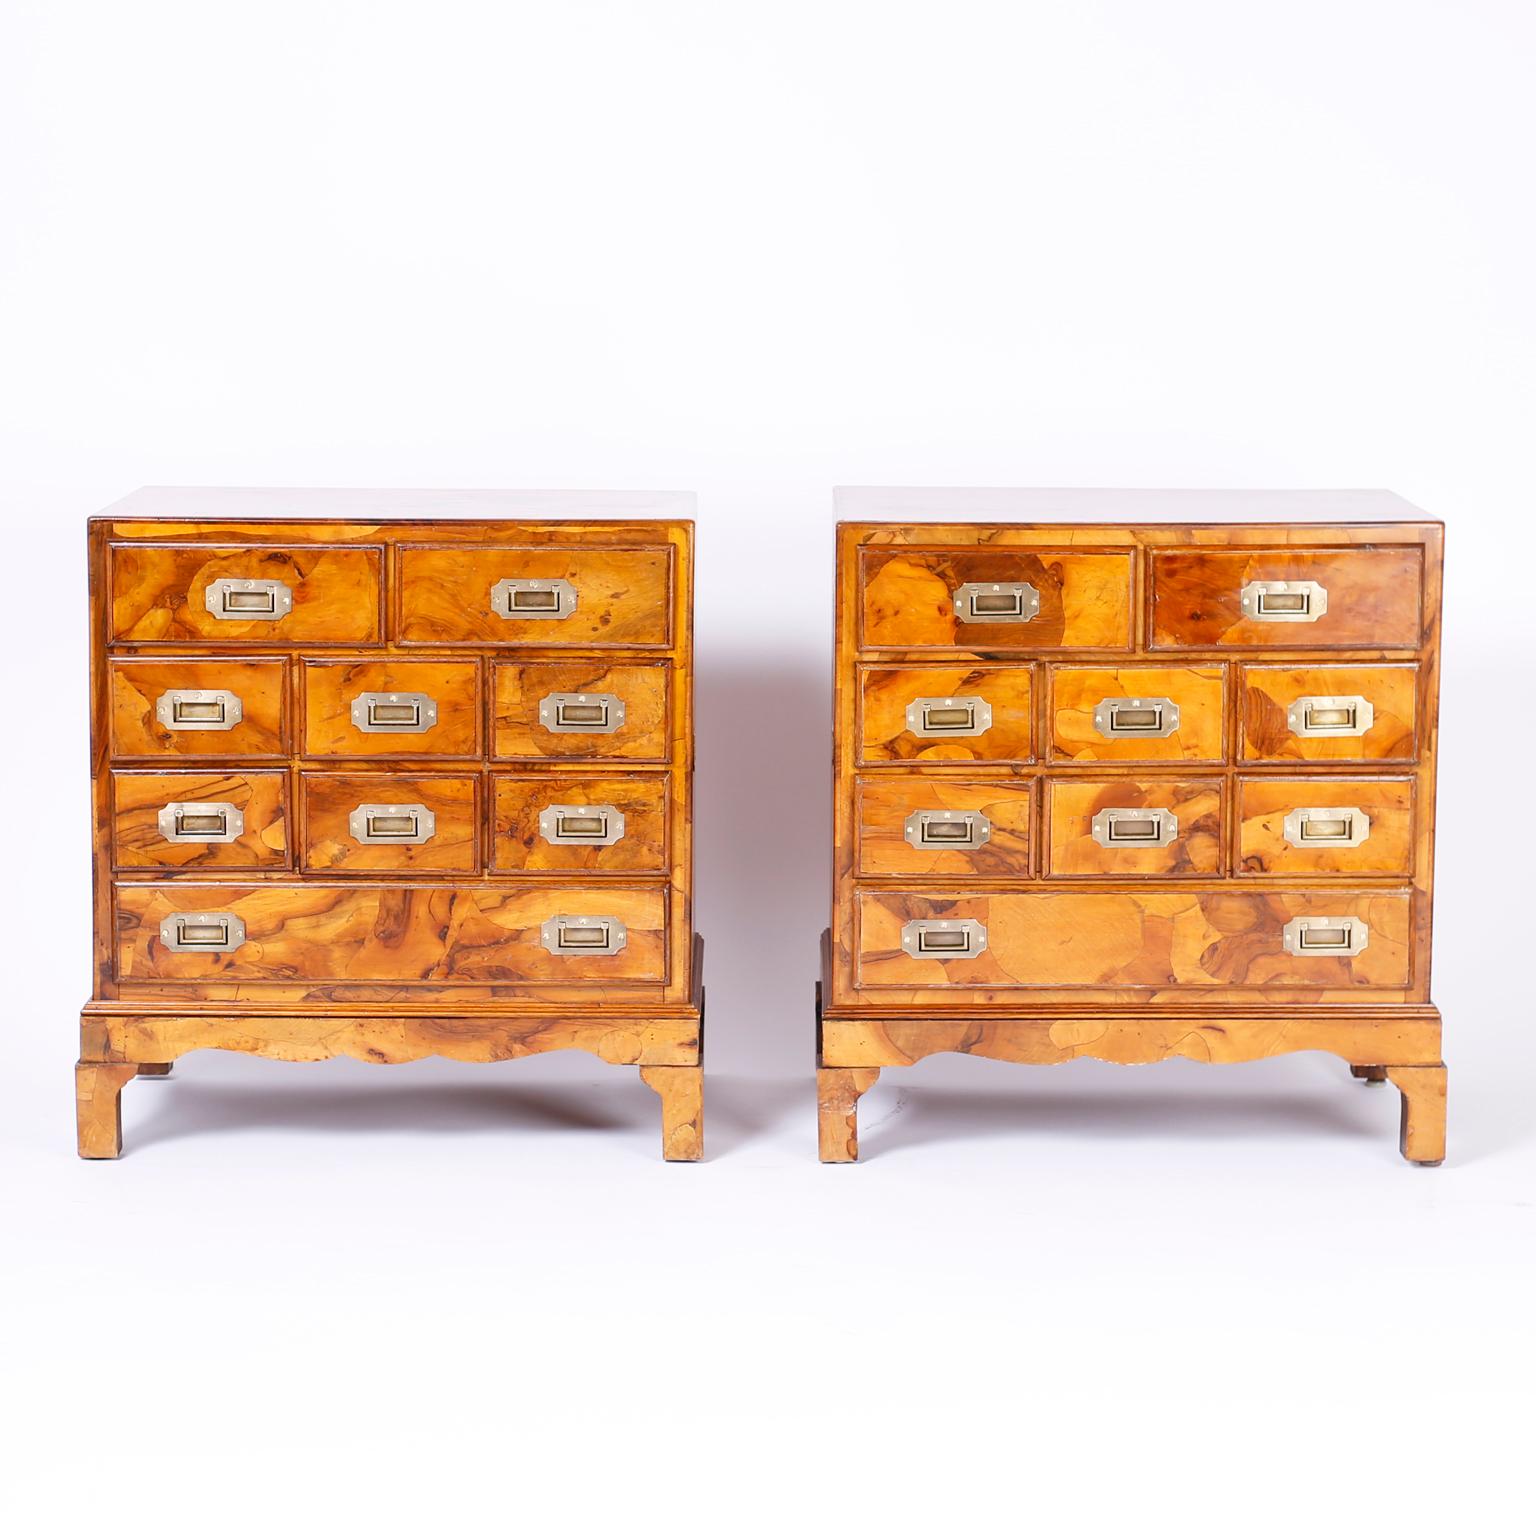 Pair of midcentury Italian nine drawer campaign chests with a stylized Queen Anne form, campaign brass hardware, and featuring a distinctive veneer technique that joins patches of bleached burled walnut into an unusual organic composition.